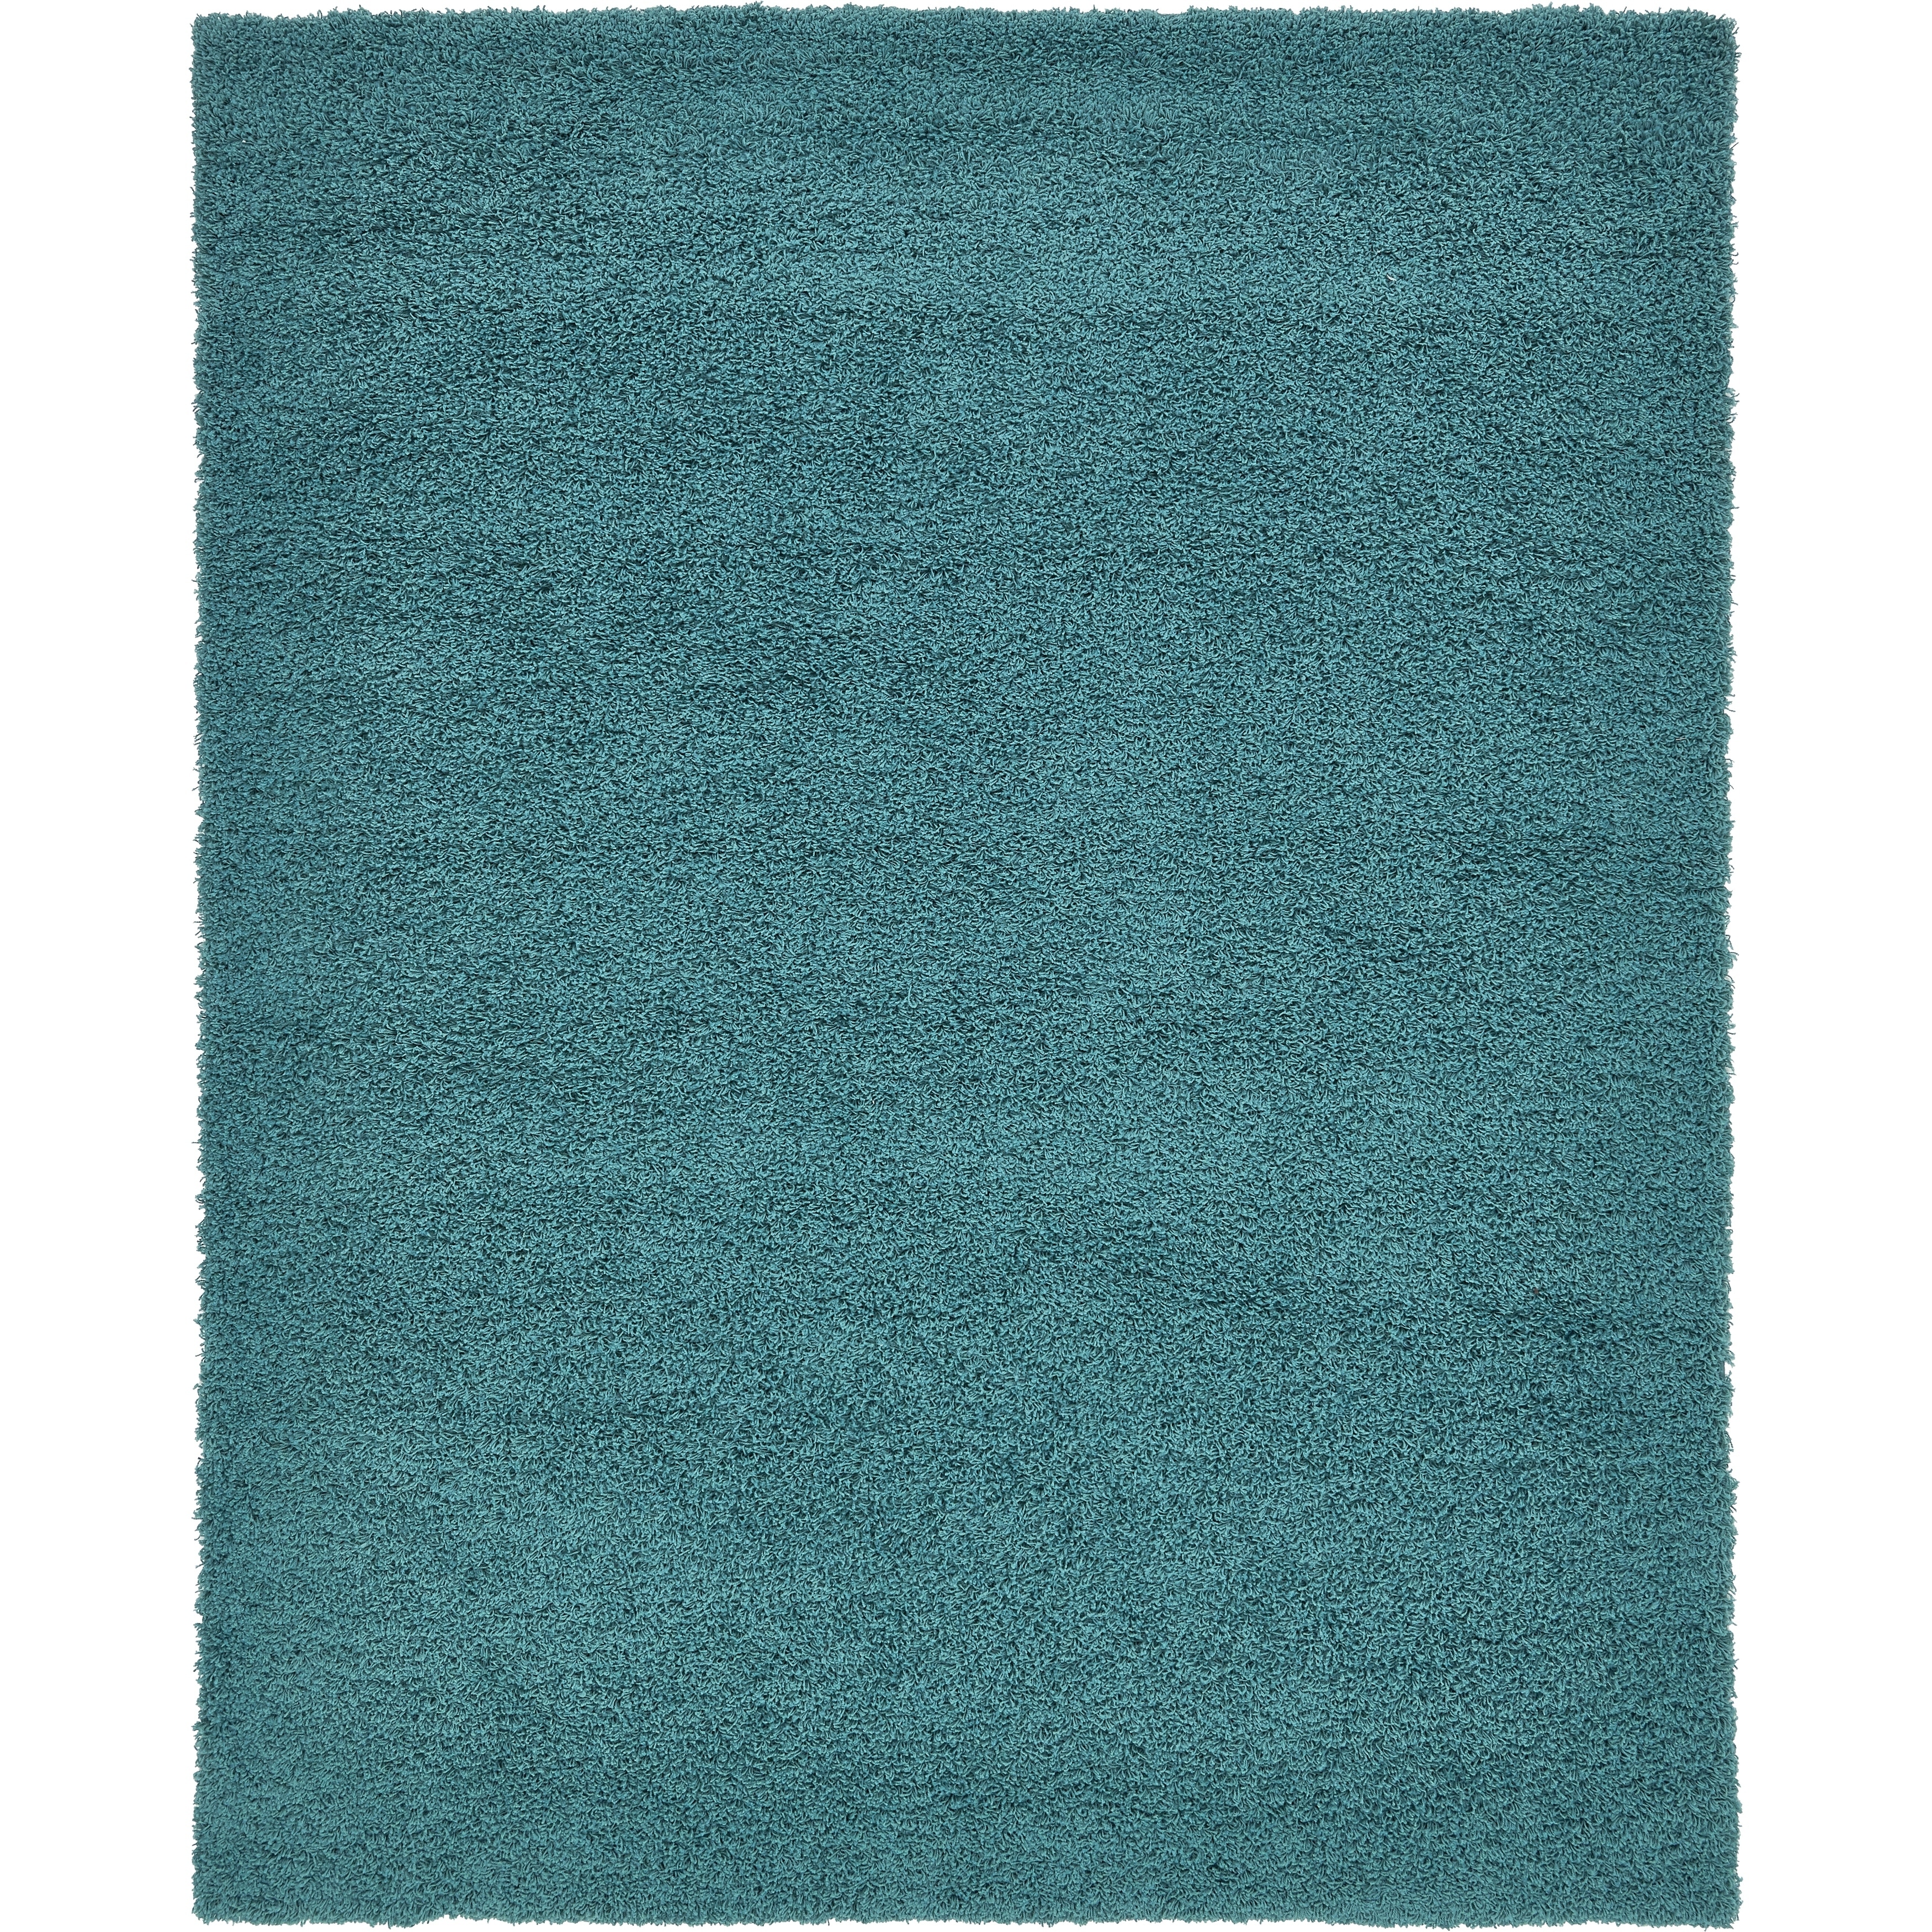 Buy Blue Shag Area Rugs Online At Overstockcom Our Best Rugs Deals